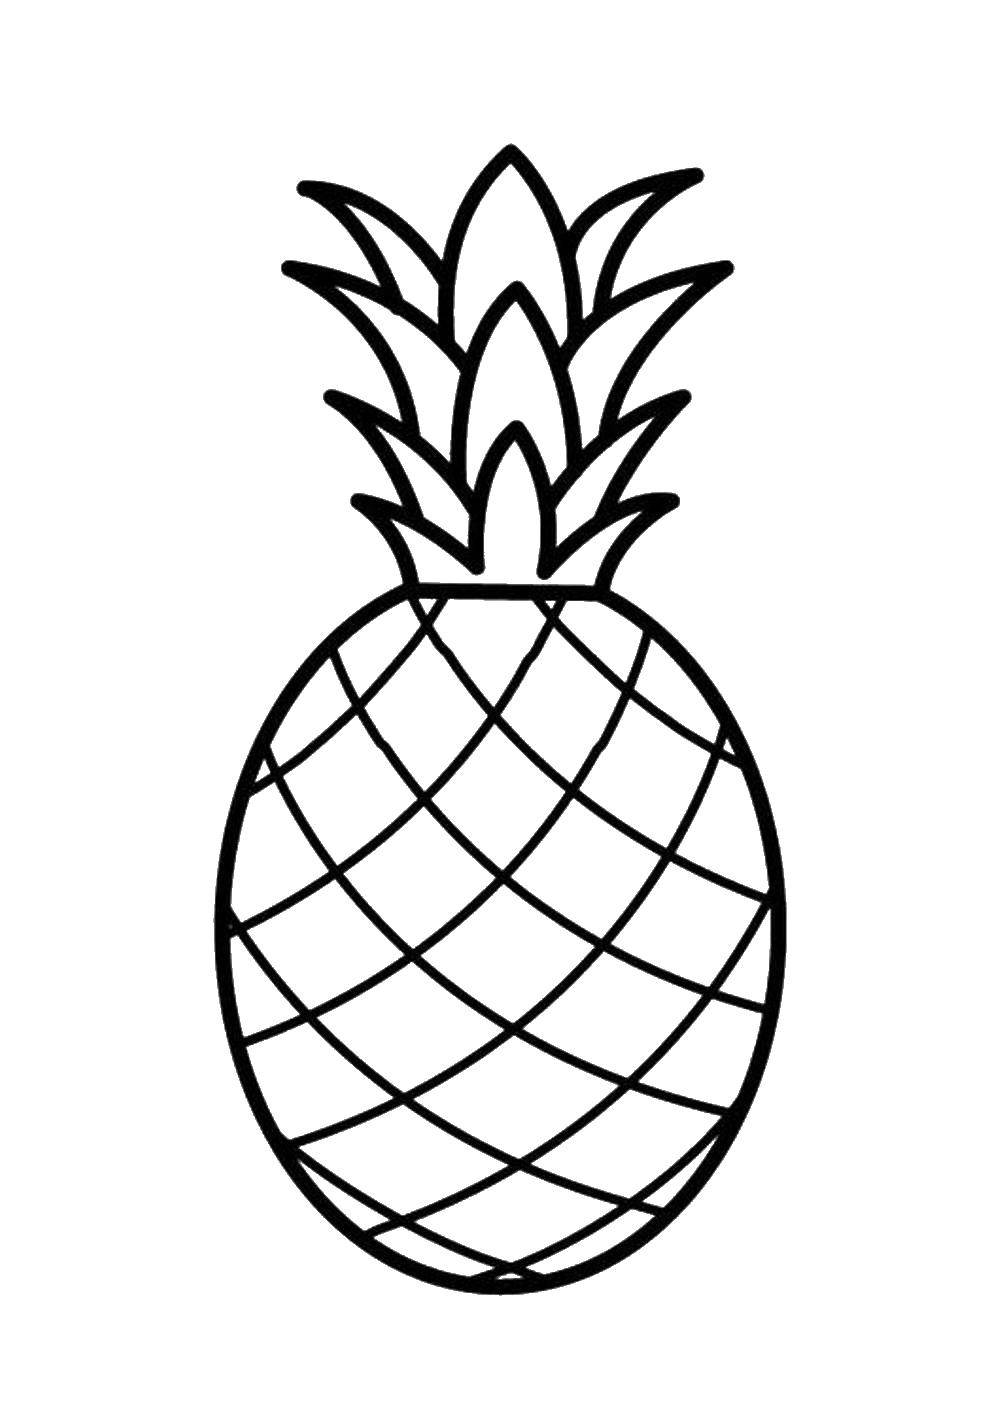 Coloring Pineapple. Category fruits. Tags:  pineapple.